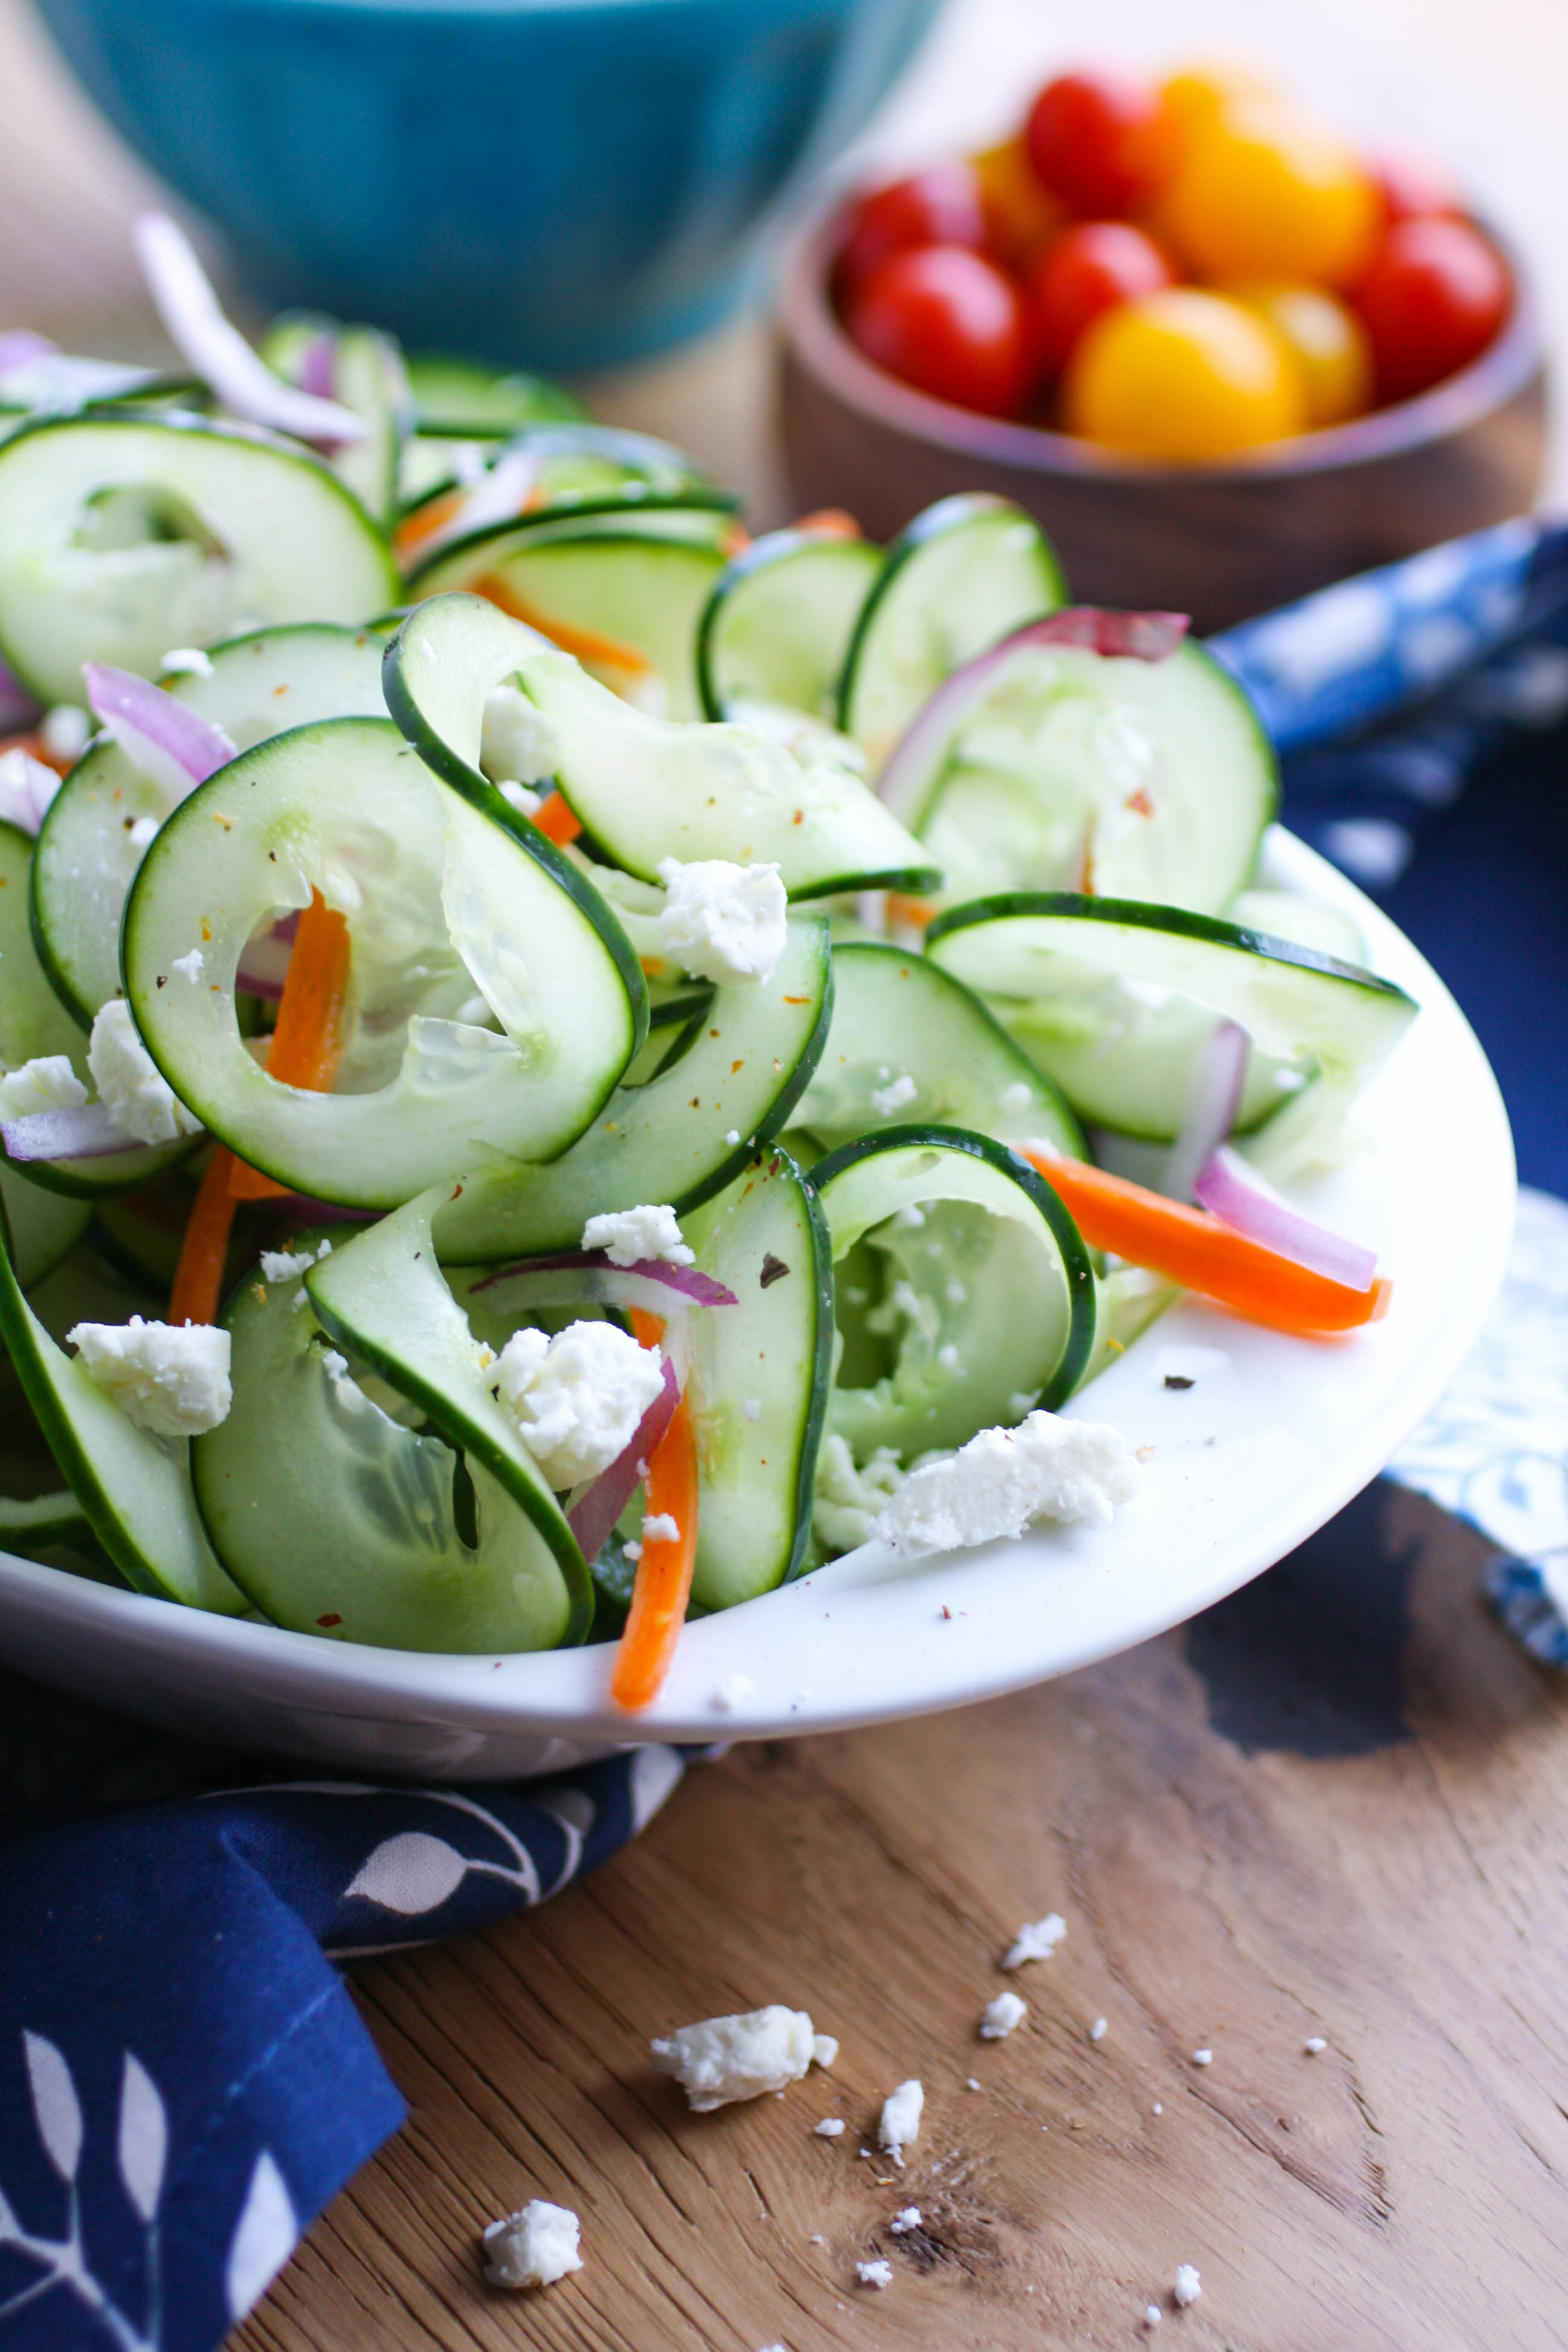 Sweet and Tangy Cucumber Ribbon Salad is a delightfully simple dish. You'll love the fresh flavors in this salad.